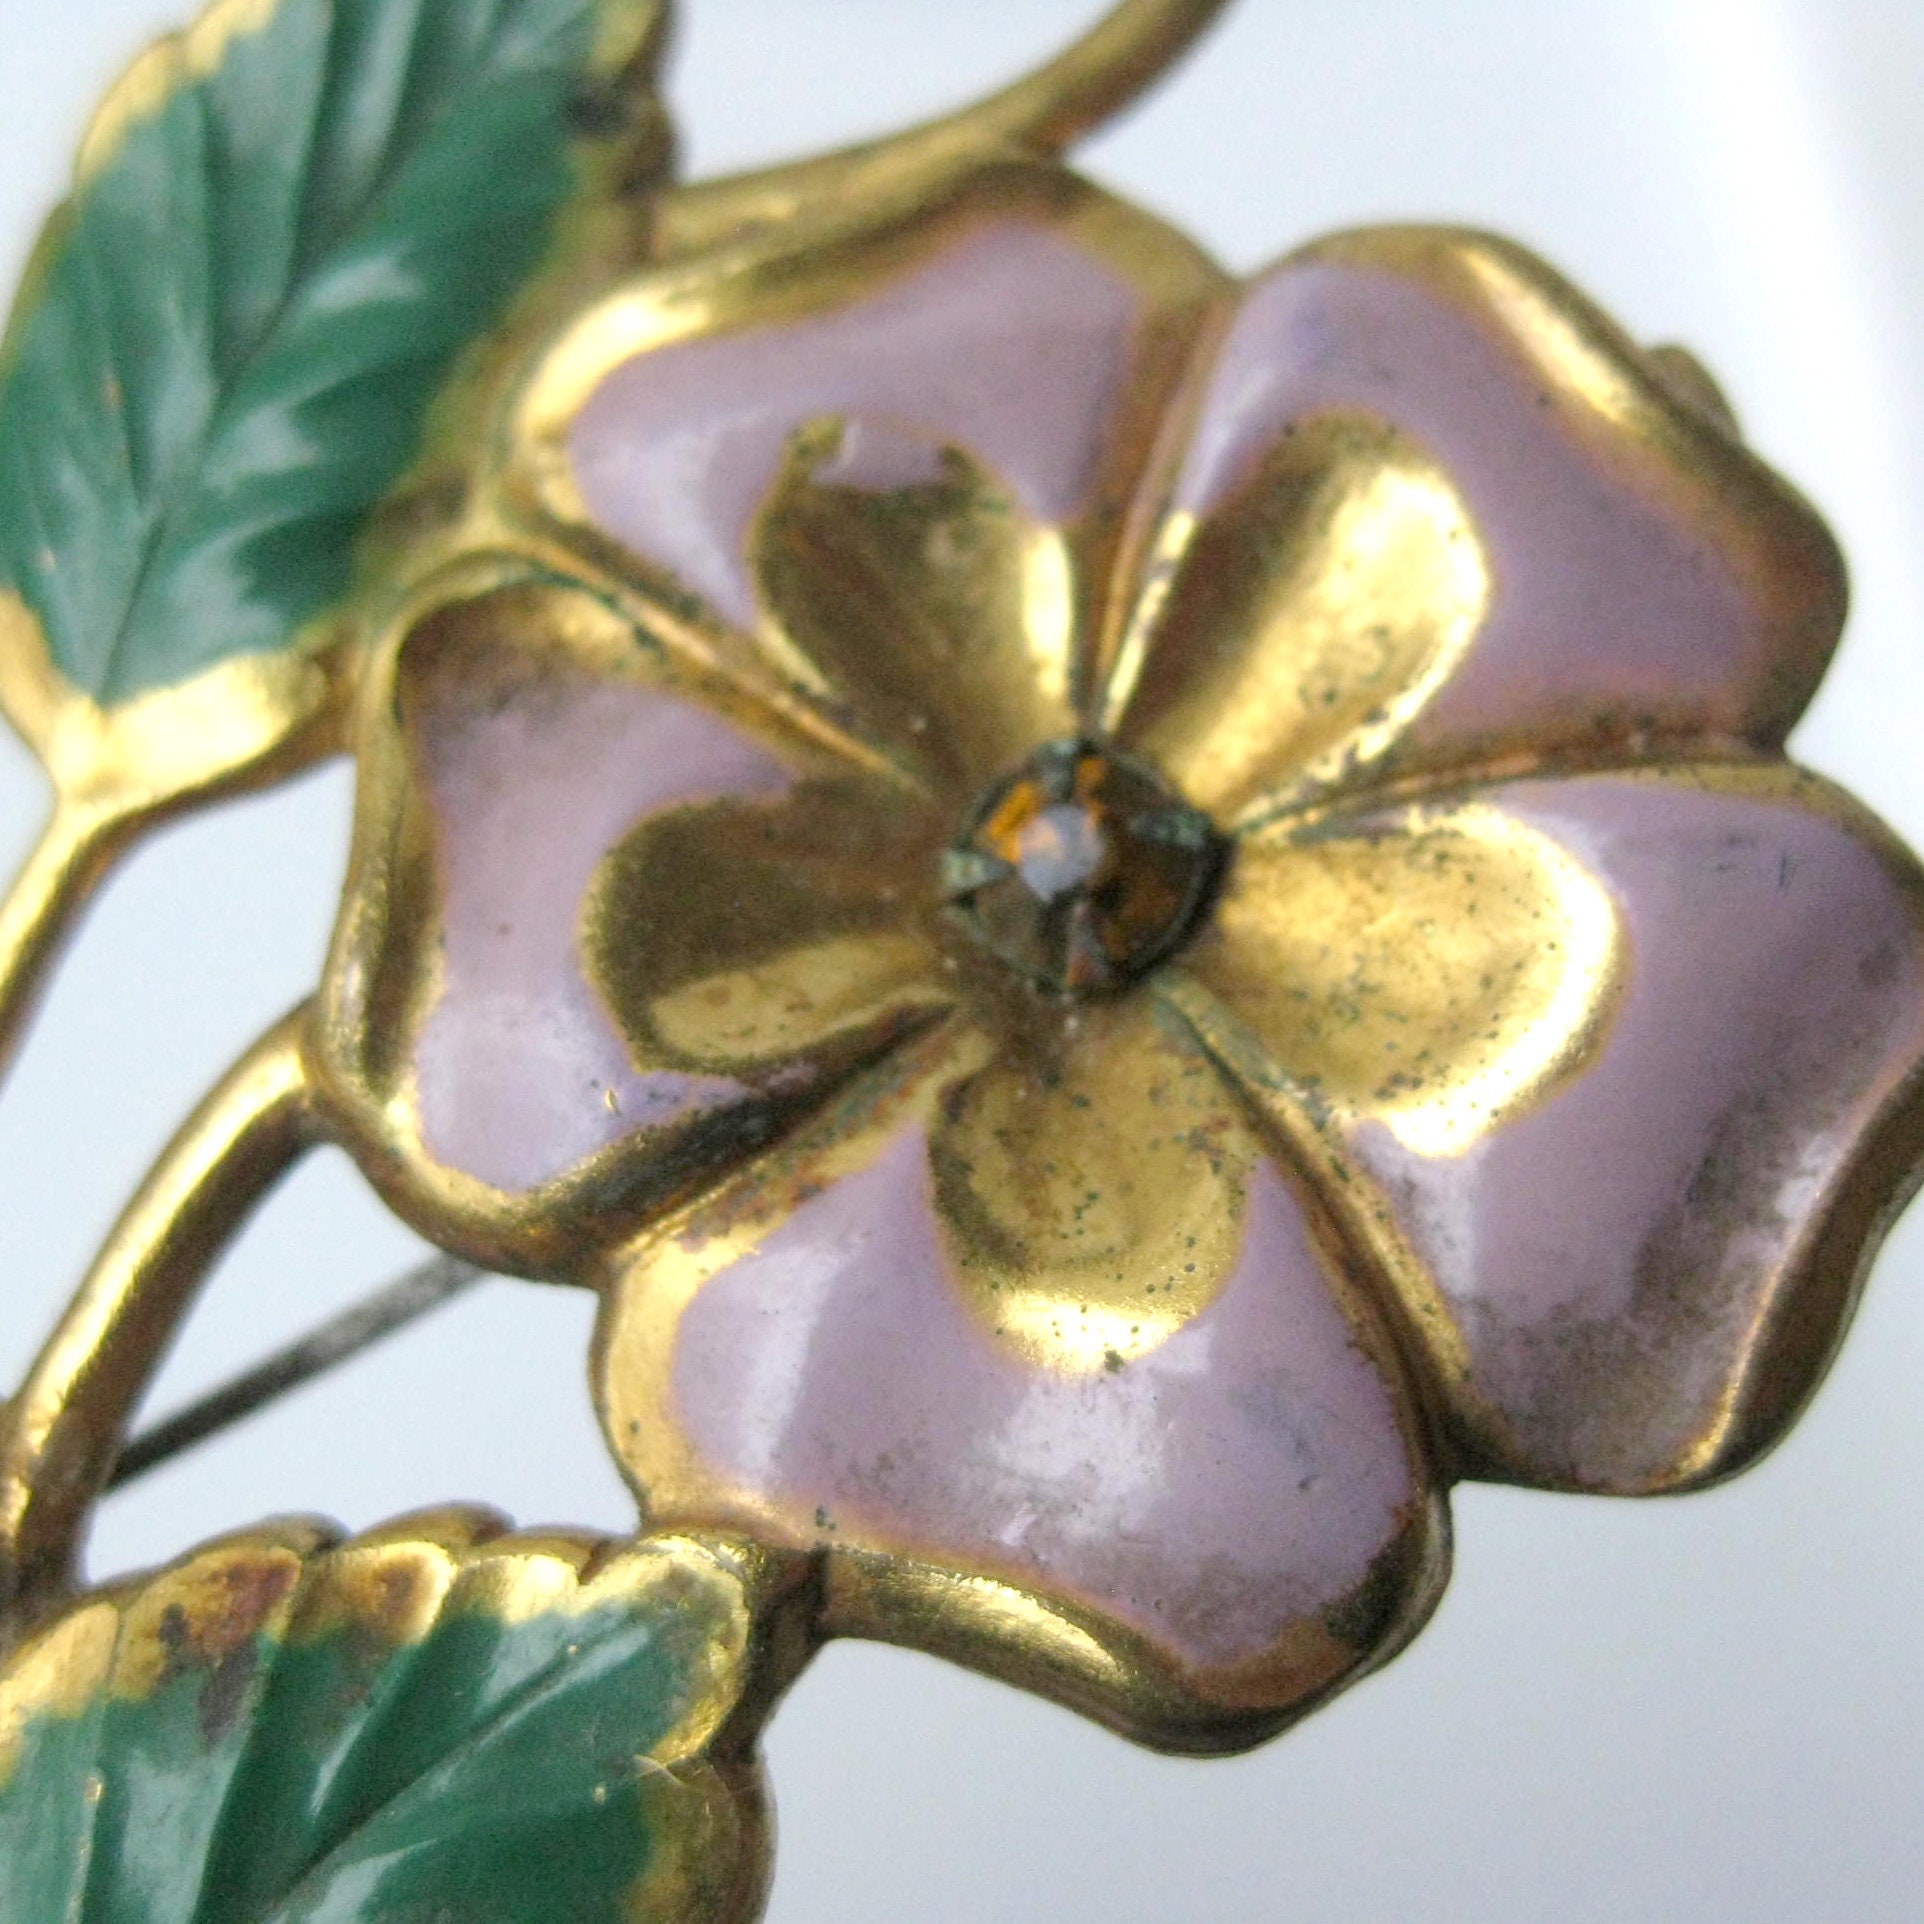 Lovely Three-Dimensional Shiny Gold Metal Flower Brooch with Clear… –  Second Wind Vintage